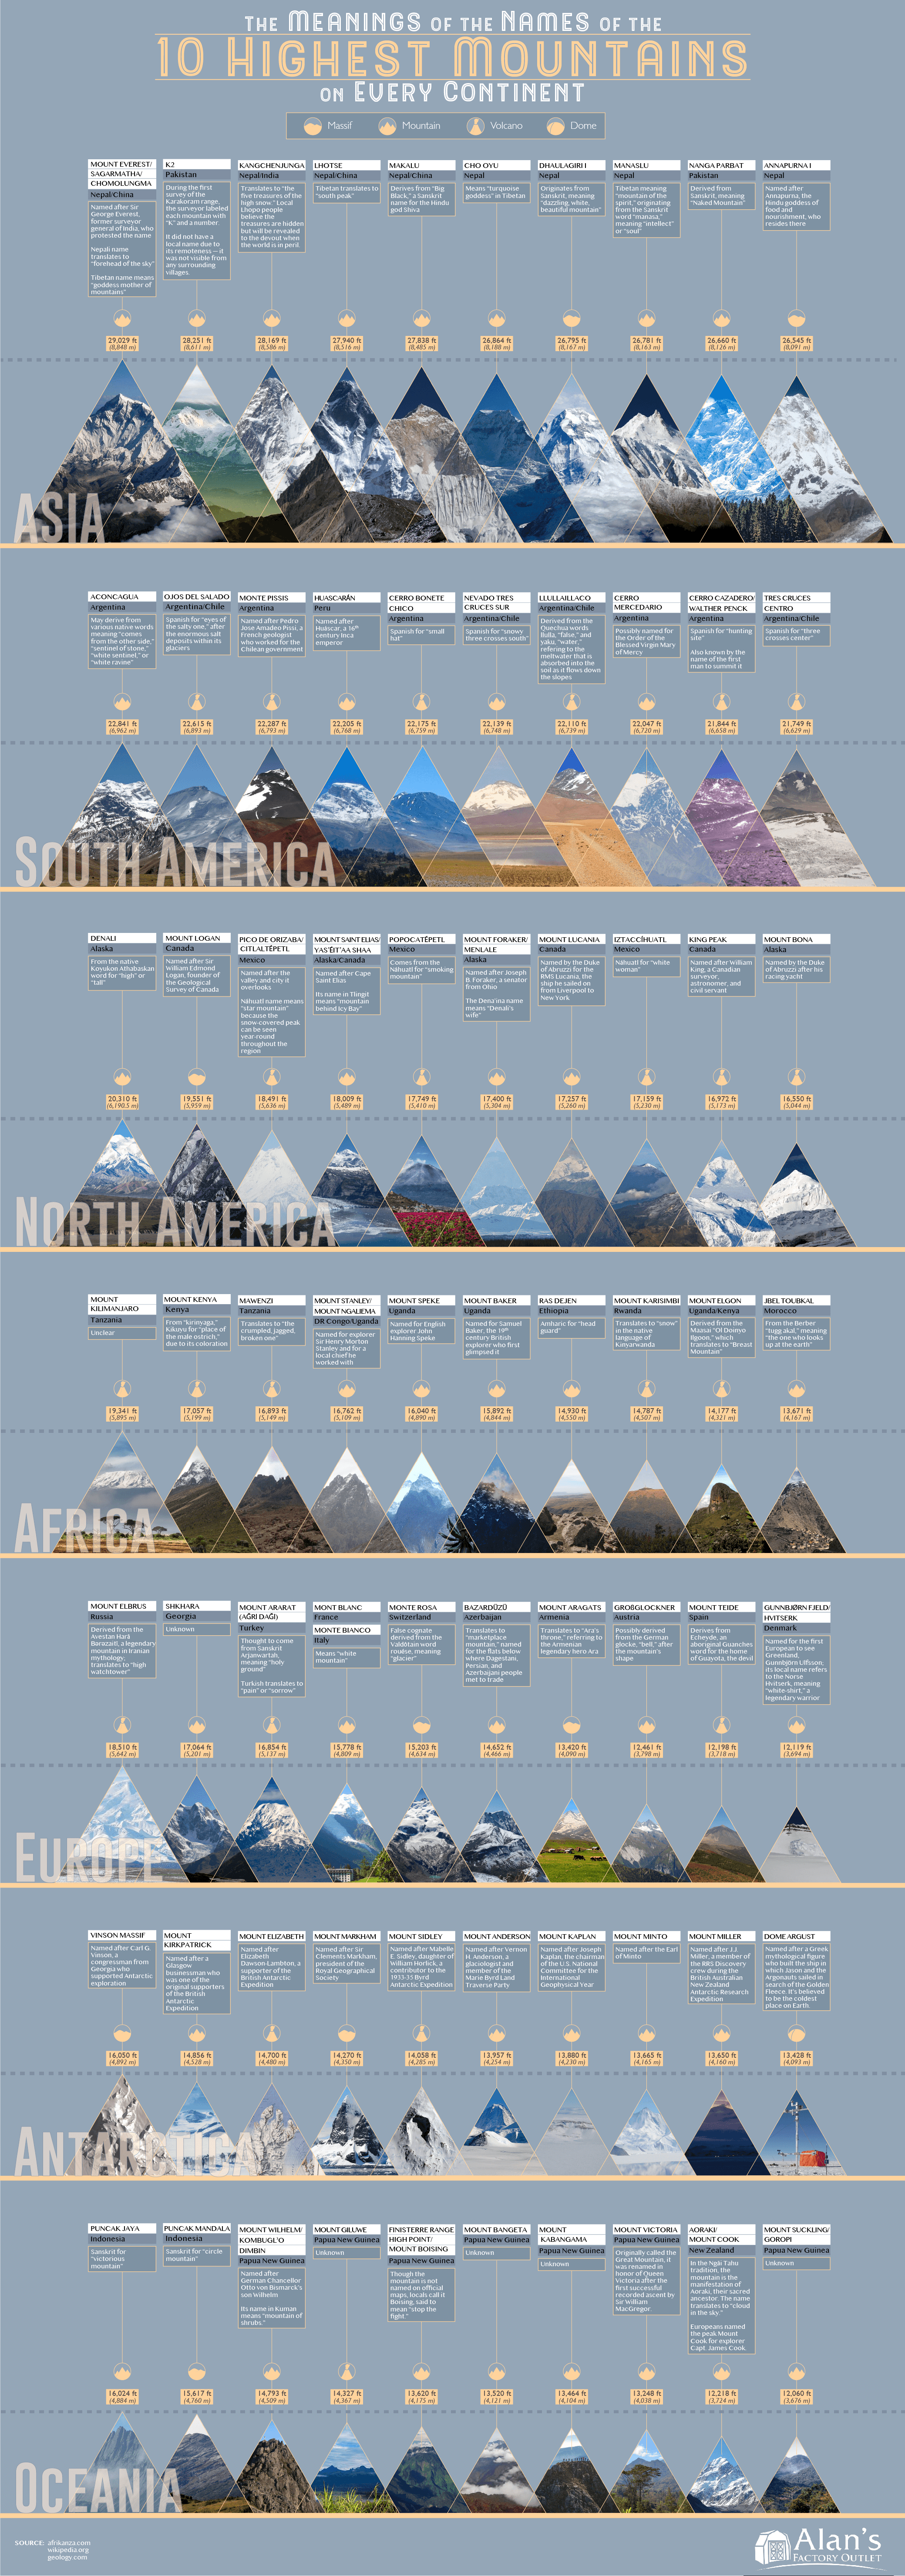 The Meanings of the Names of the World's Highest Mountains